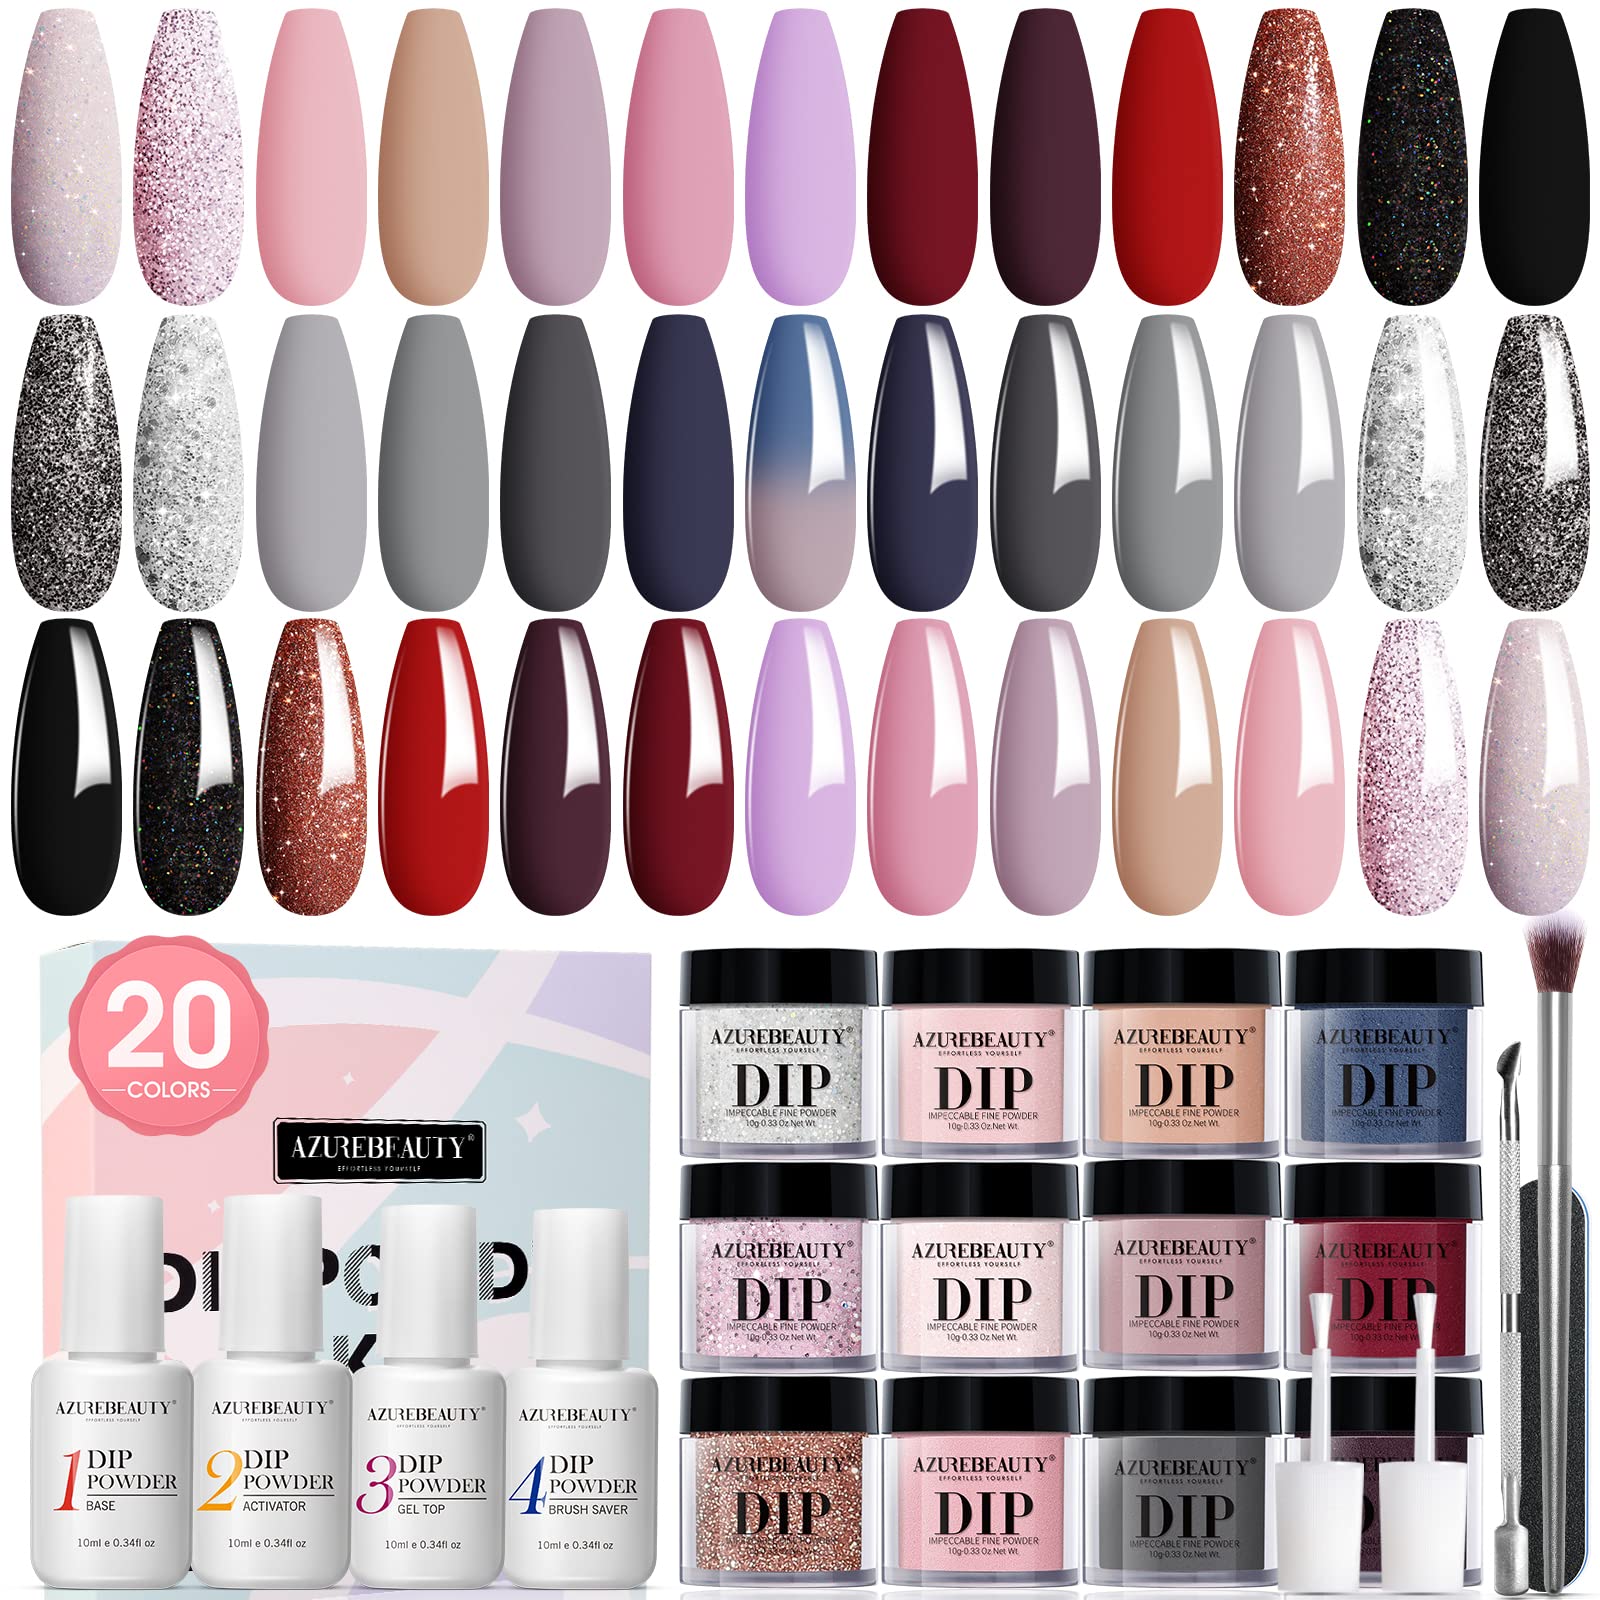 29 Pcs Dip Powder Nail Kit Starter, AZUREBEAUTY 20 Colors Glitter Red Pink Black Acrylic Dipping Powder System Essential Liquid Set with Base & Top Coat for French Nails Art Manicure Gift for Women